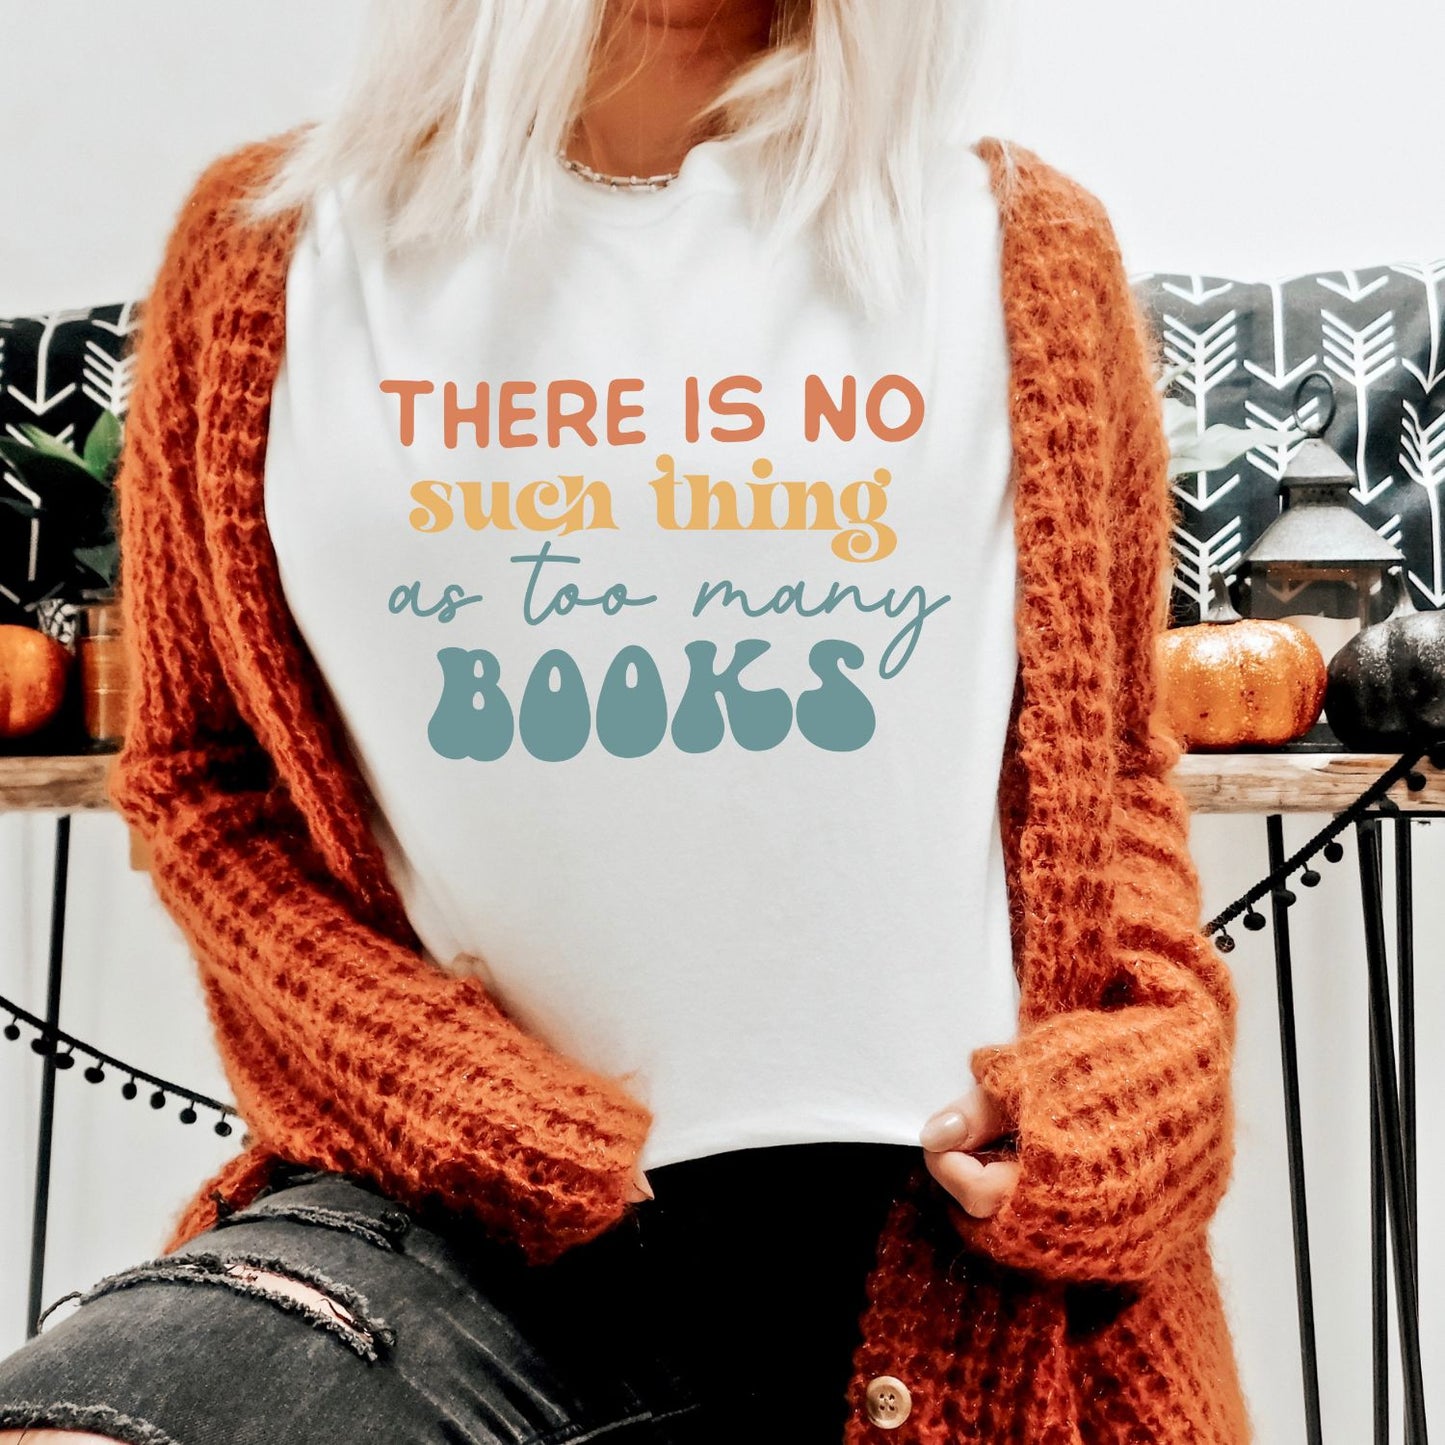 There is no such thing as too many books